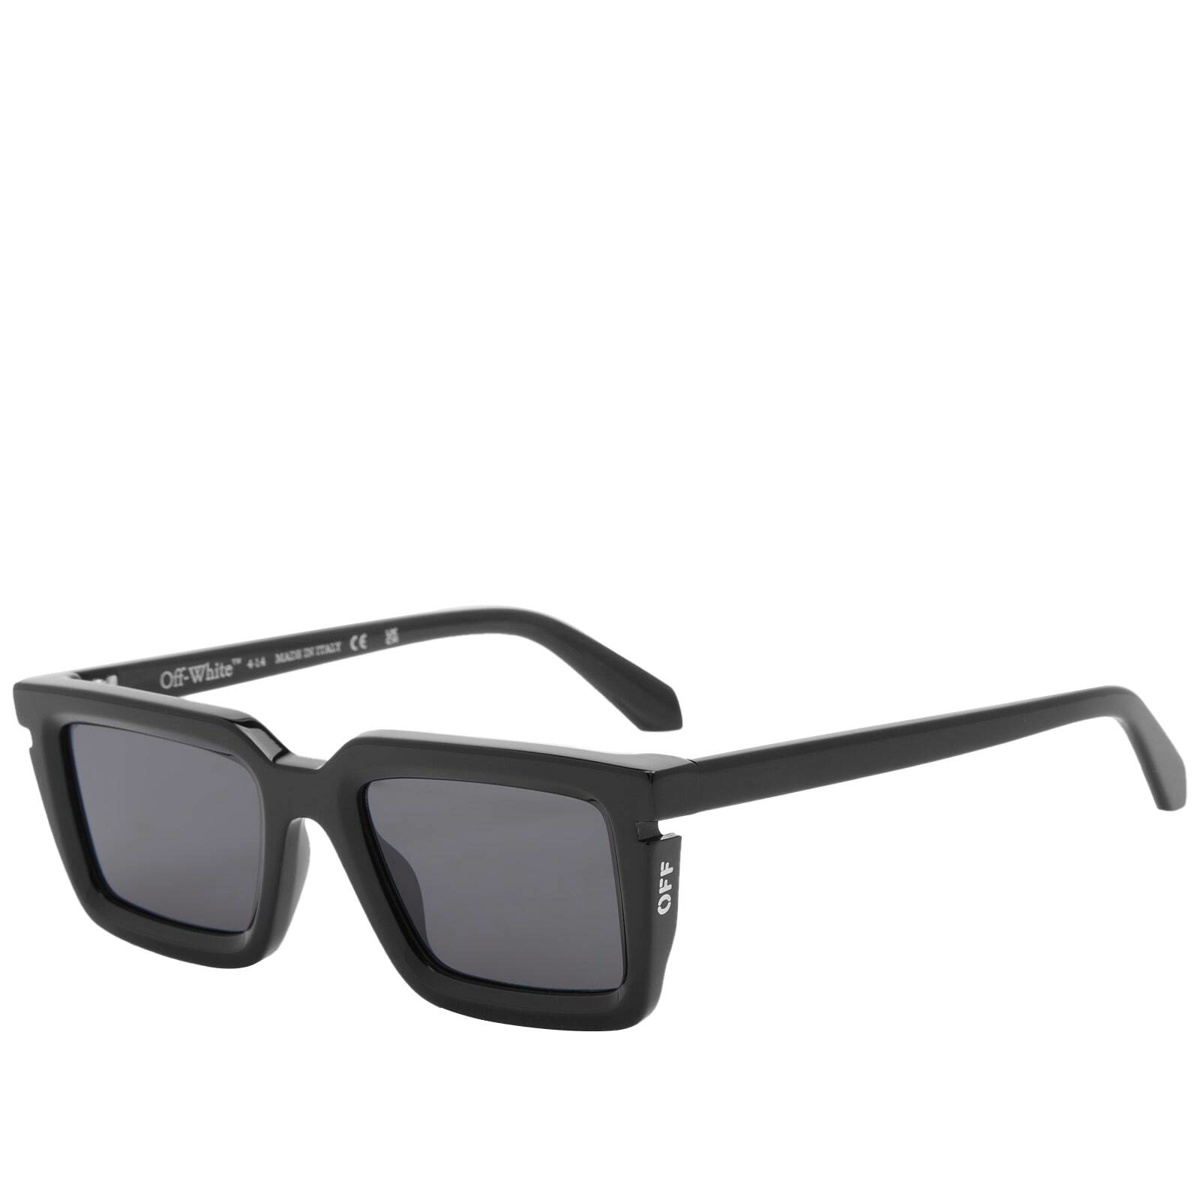 Off-White Clip On Sunglasses in Black/Red Off-White